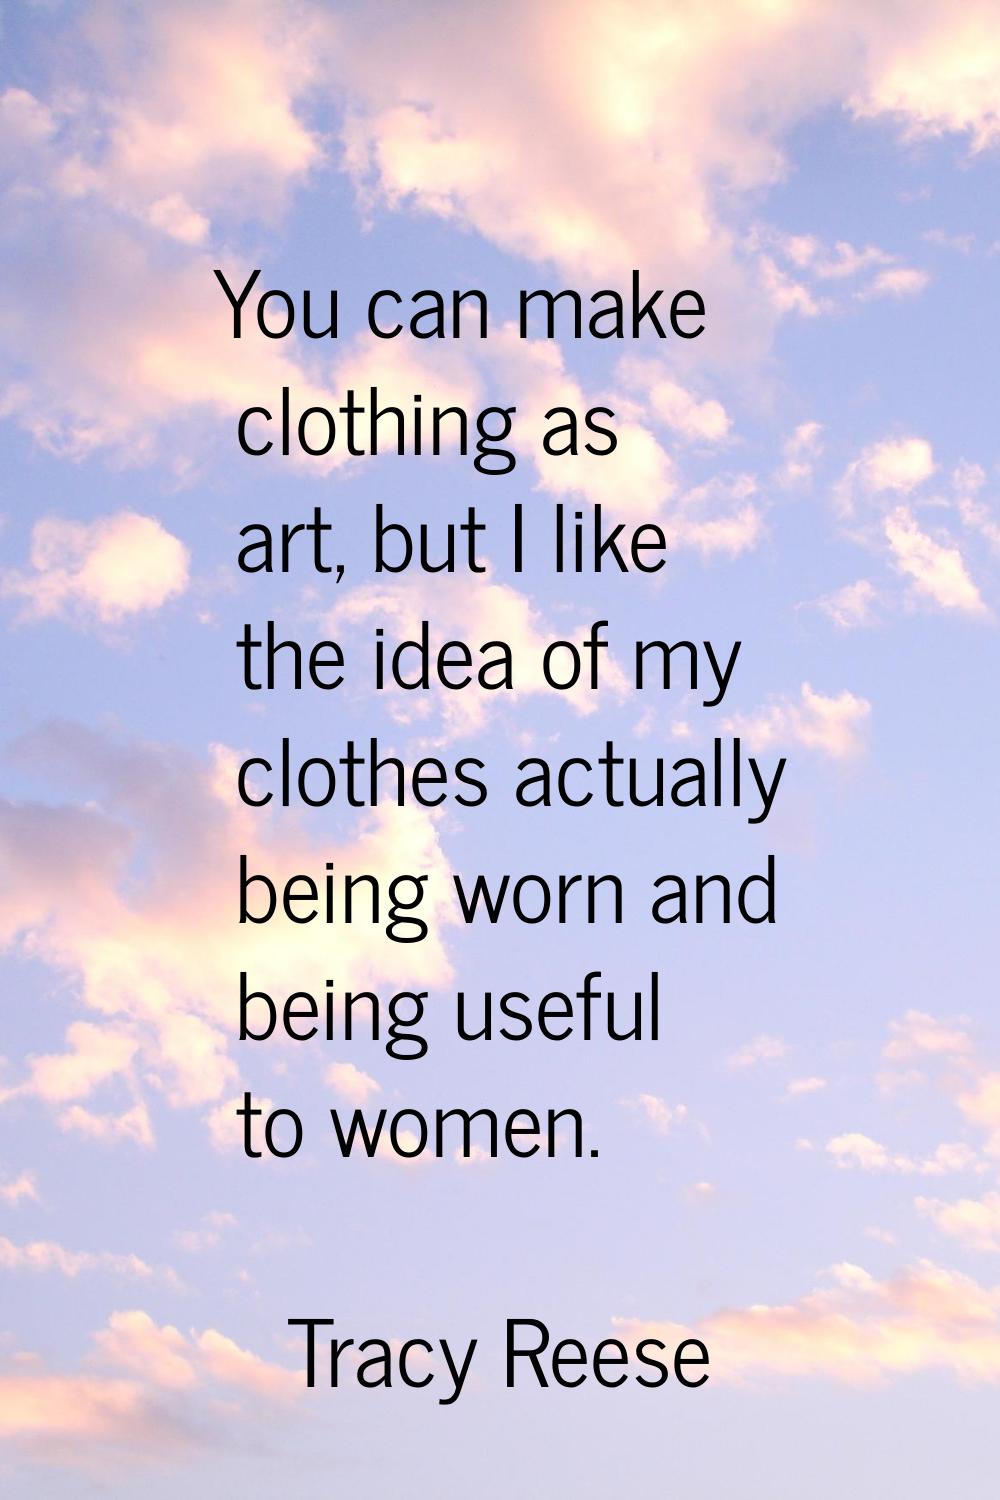 You can make clothing as art, but I like the idea of my clothes actually being worn and being usefu